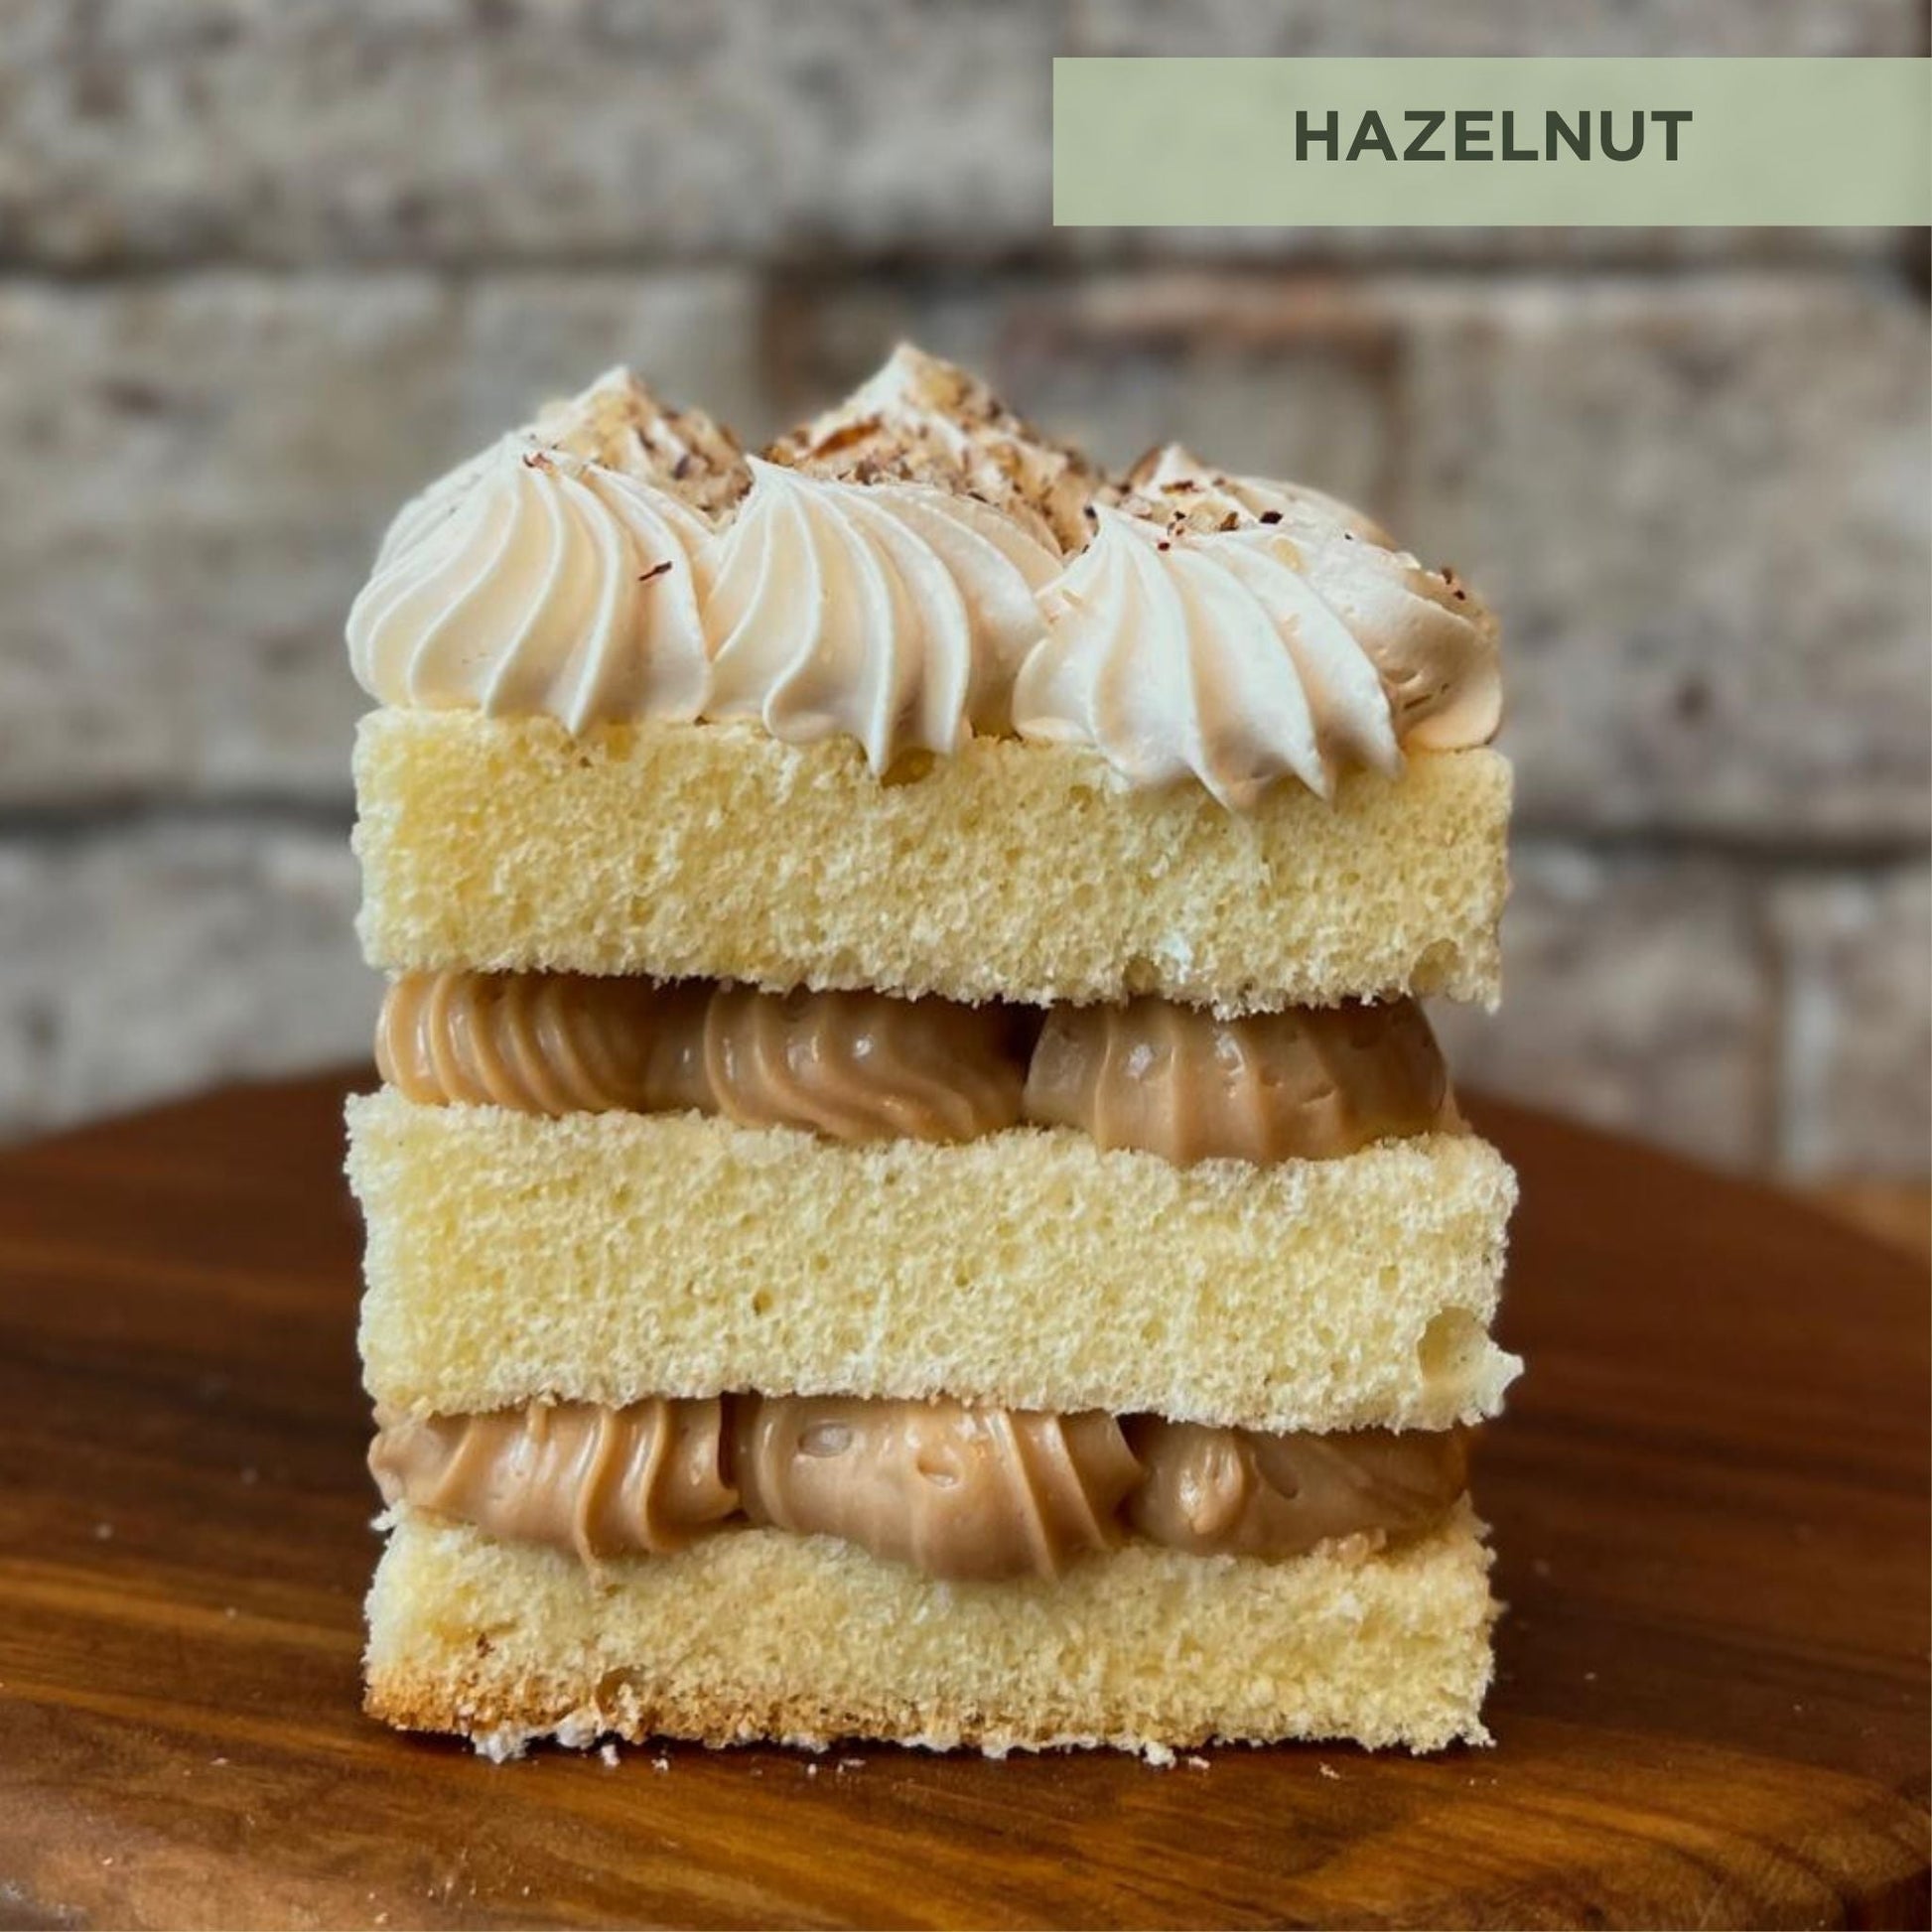 Side view of hazelnut flavour of cake